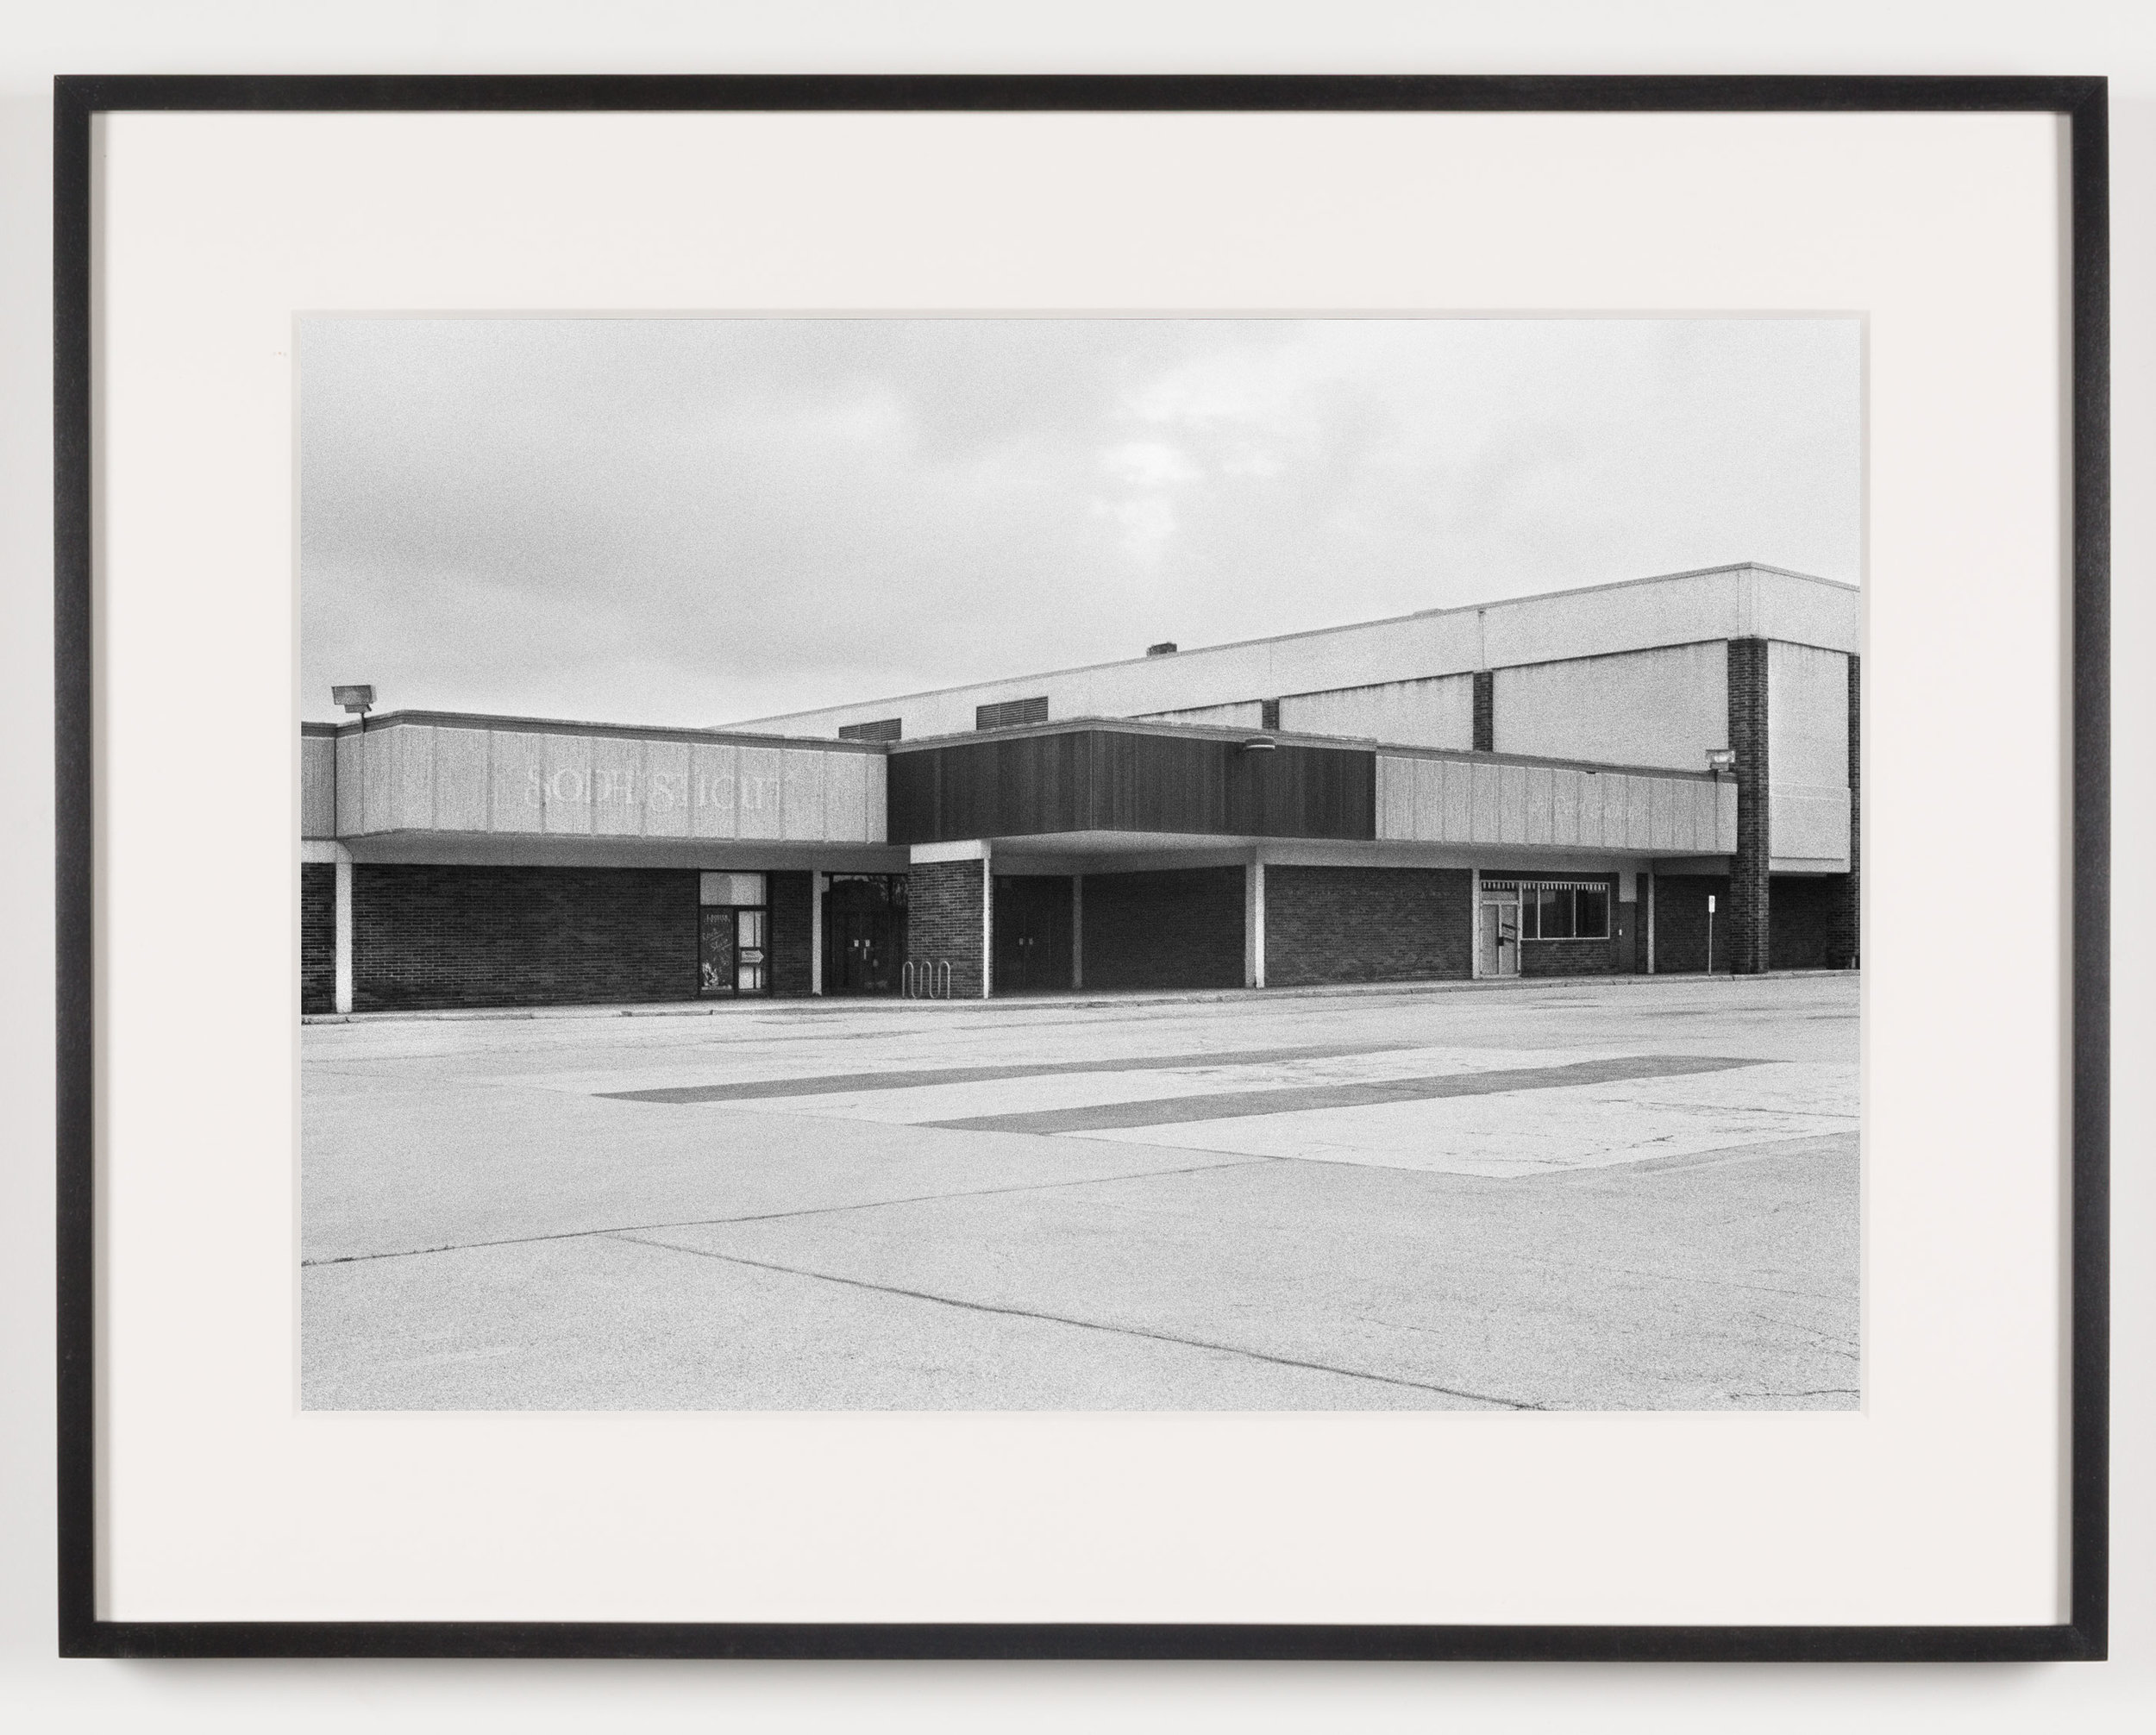   Southwyck Mall ('Sophisticut'), Toledo, OH, Est. 1972, Demo. 2009   2011  Epson Ultrachrome K3 archival ink jet print on Hahnemühle Photo Rag paper  21 5/8 x 28 1/8 inches   American Passages, 2001–2011    A Diagram of Forces, 2011     